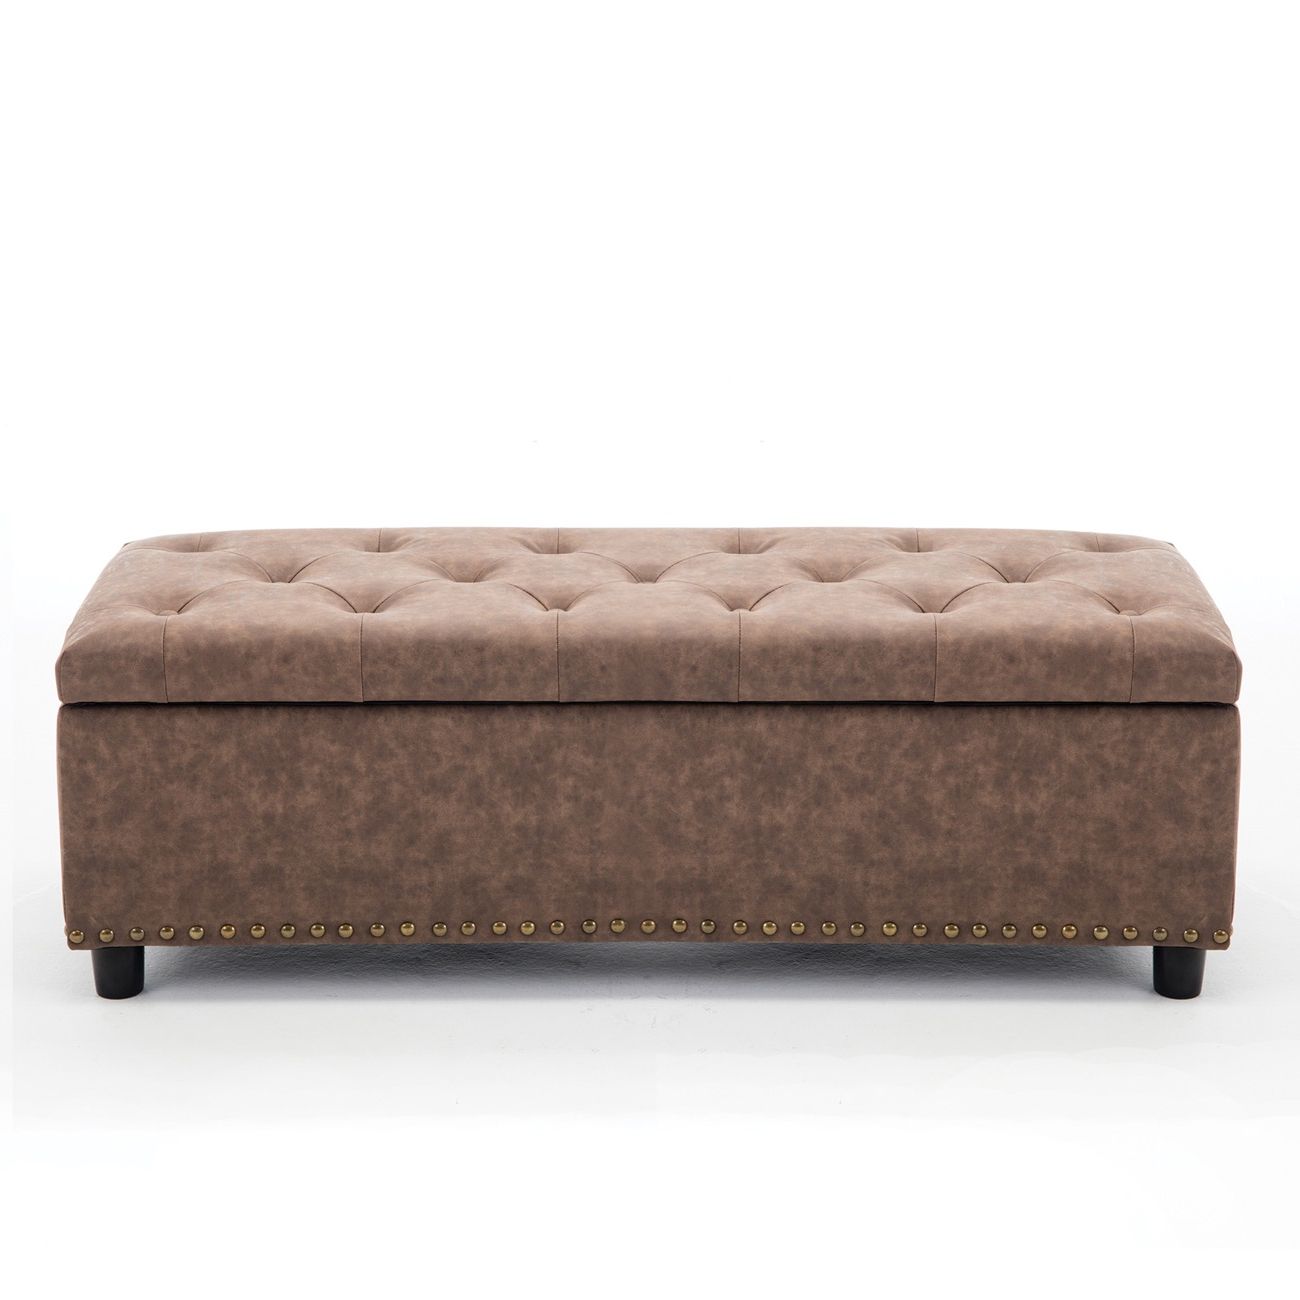 Most Up To Date Orange Tufted Faux Leather Storage Ottomans Regarding Belleze 48" Upholstered Faux Leather Bedroom Storage Ottoman Tufted (View 10 of 10)